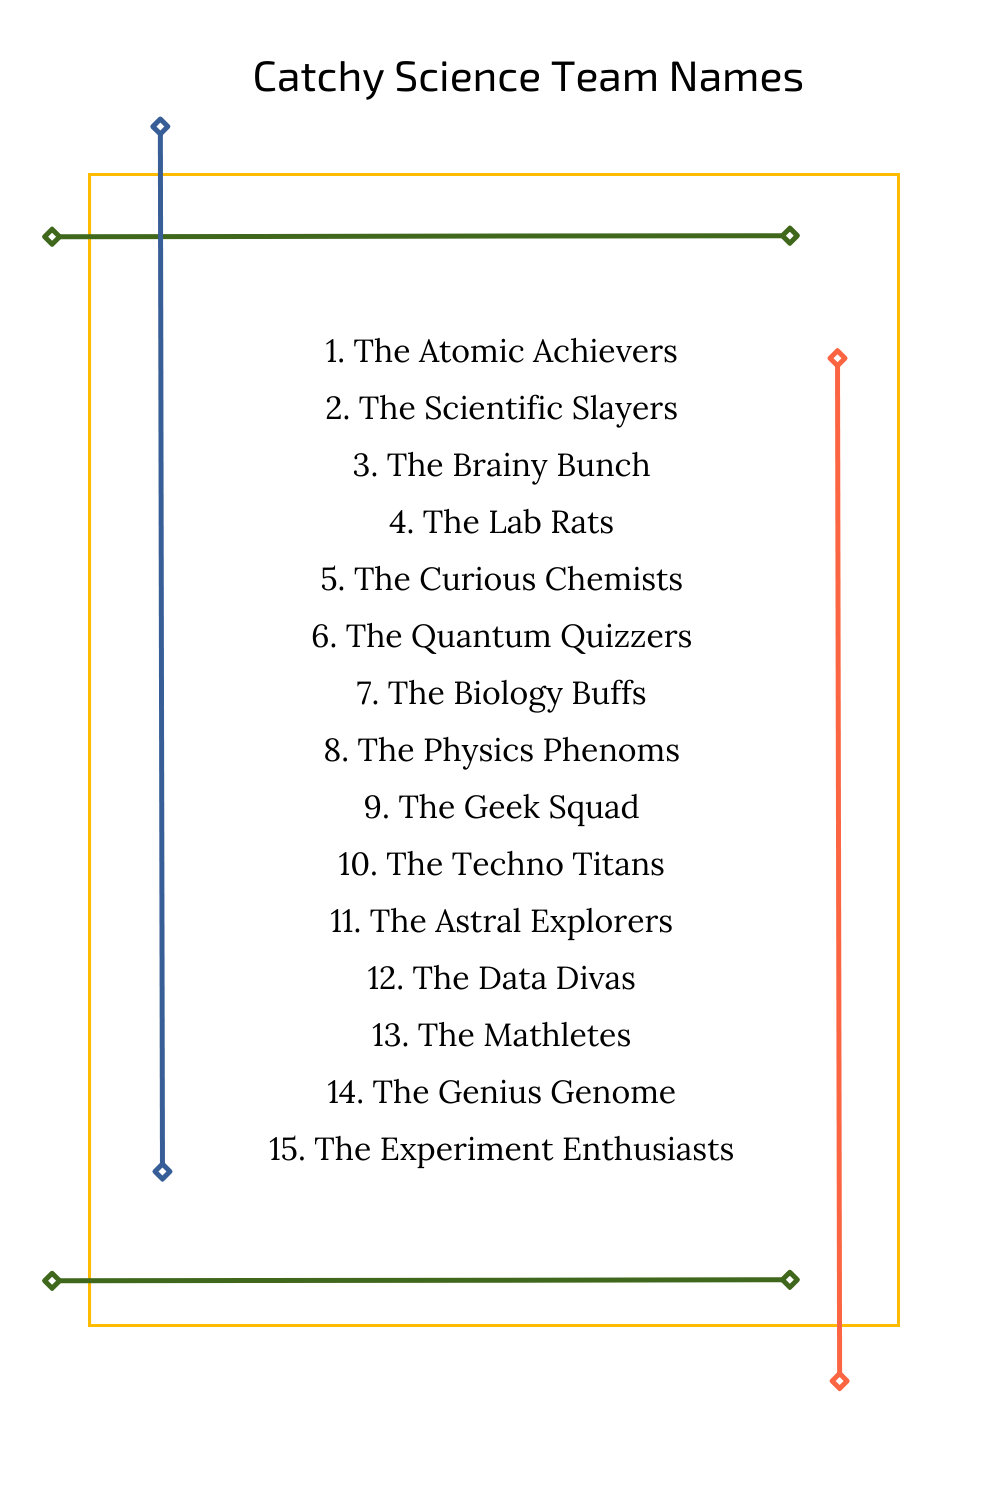 Catchy Science Team Names